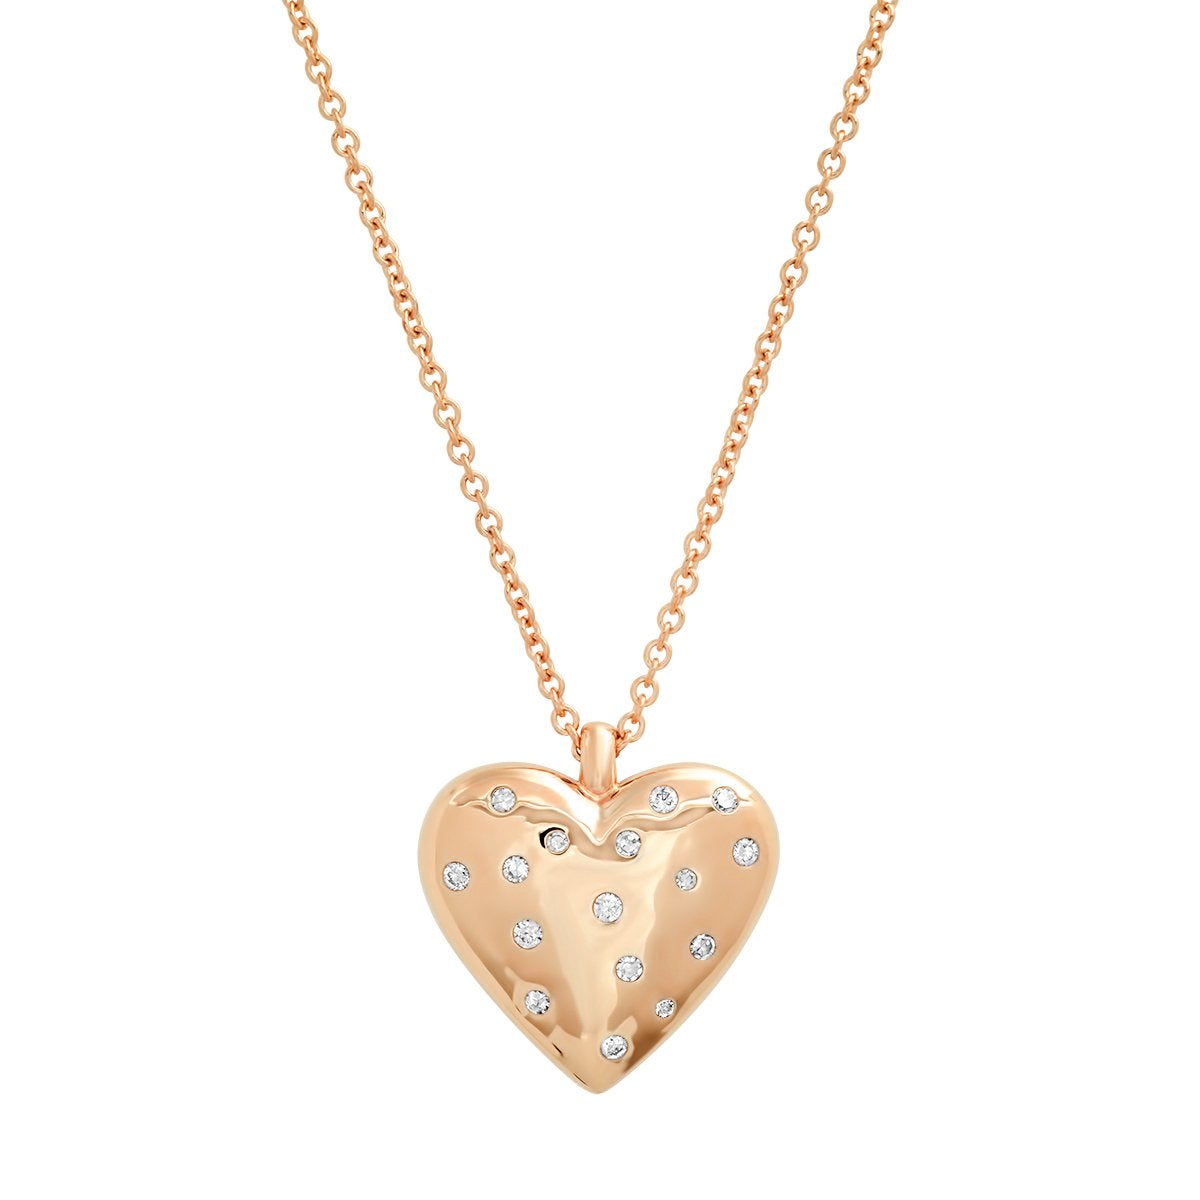  14K Rose Gold Reversible Diamond and Gold Puffy Heart Necklace